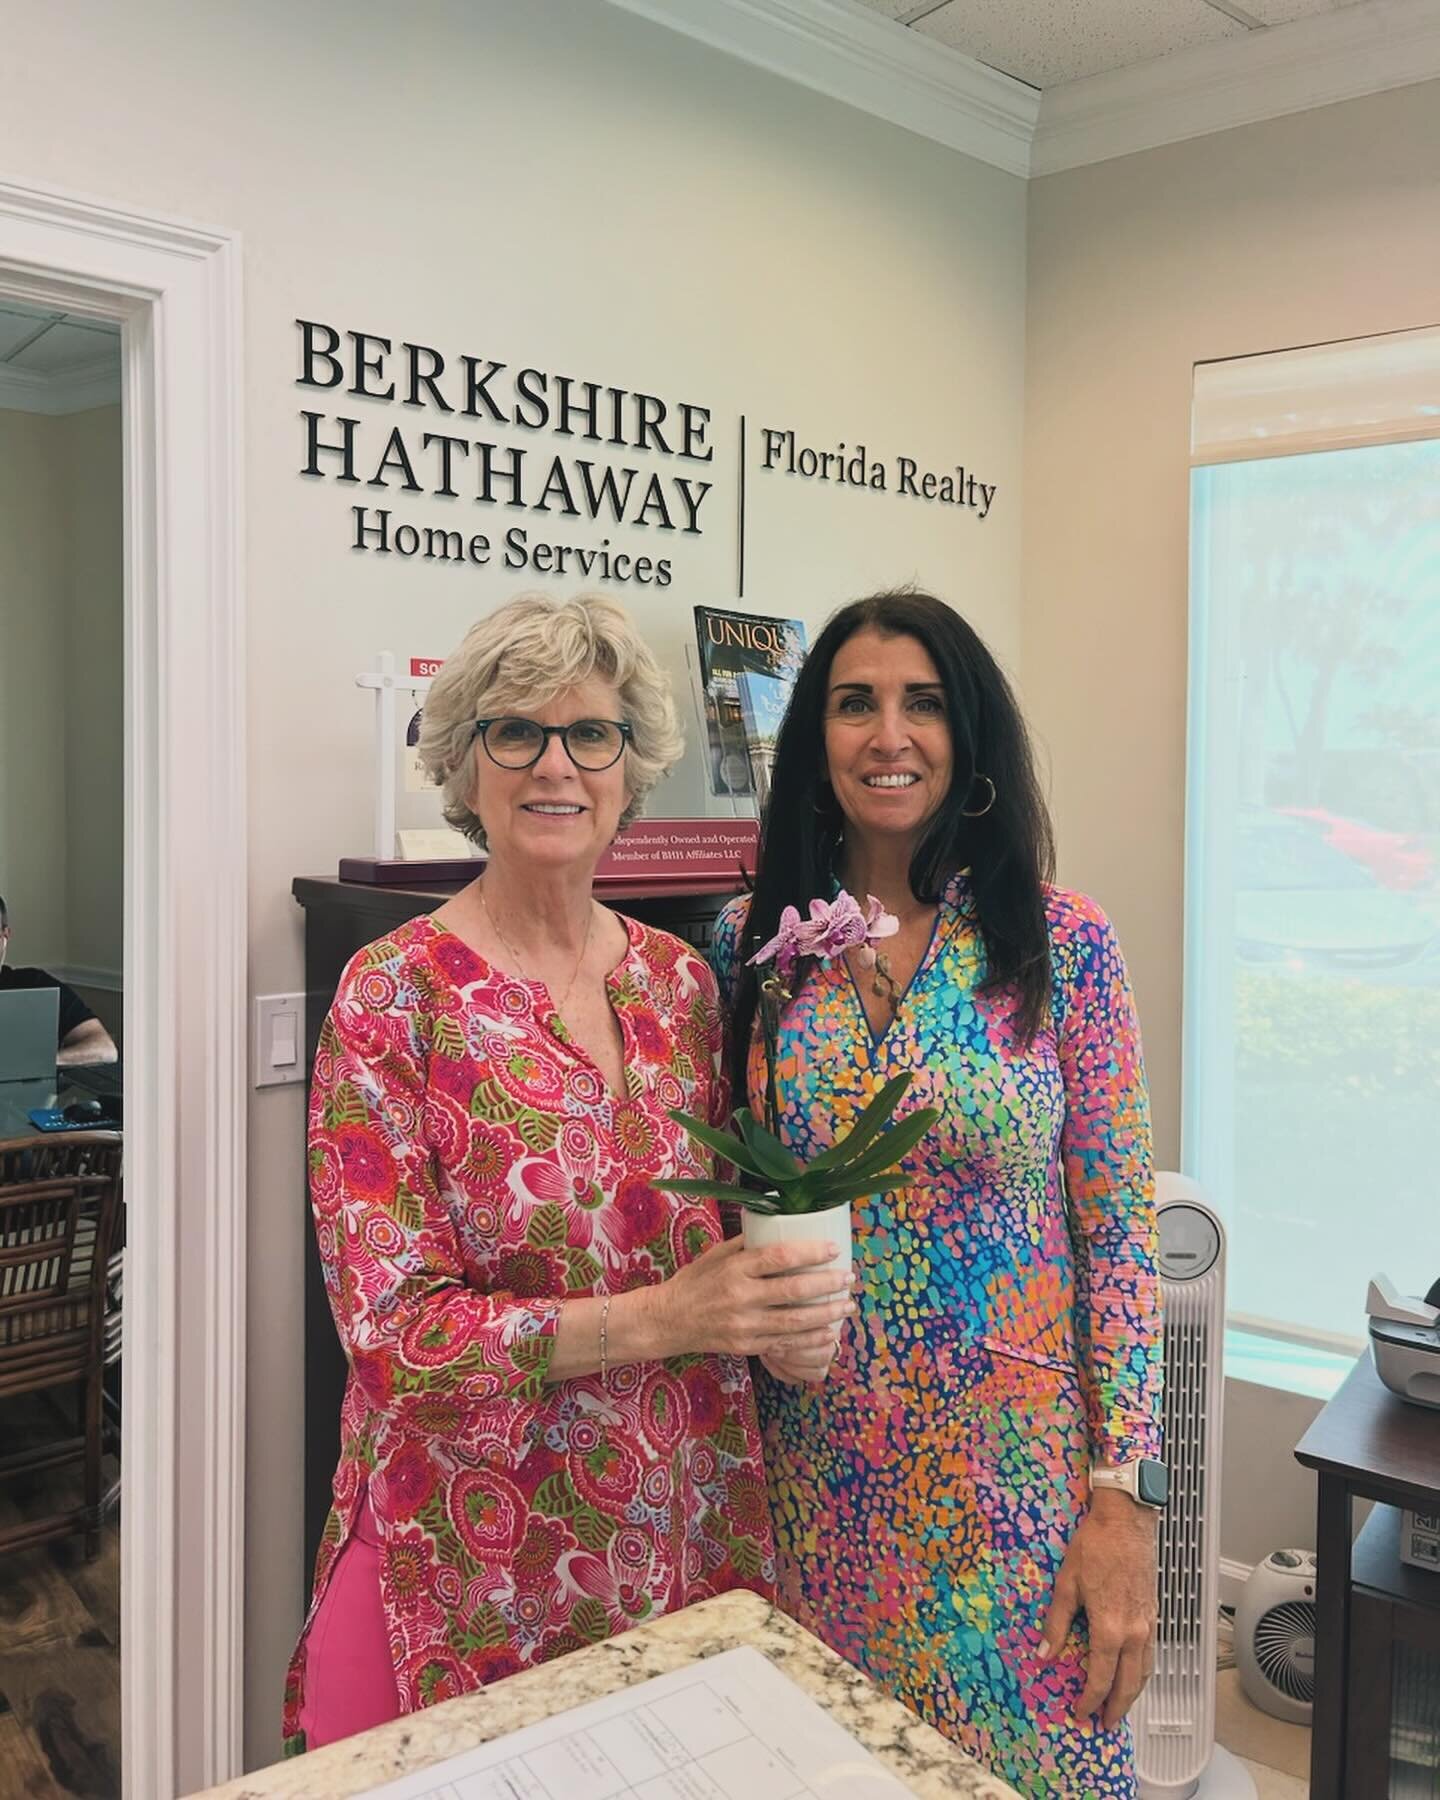 Easter Orchid Delivery!! 🐣🌸✨

We appreciate your support and partnership! 

@bhhsfloridarealty 
@onesir 
@premierestateproperties 
@dalesorensenrealestate 
@johnsislandrealestate 
@alexmacwilliamrealestate 

Wishing you all a beautiful Easter weeke